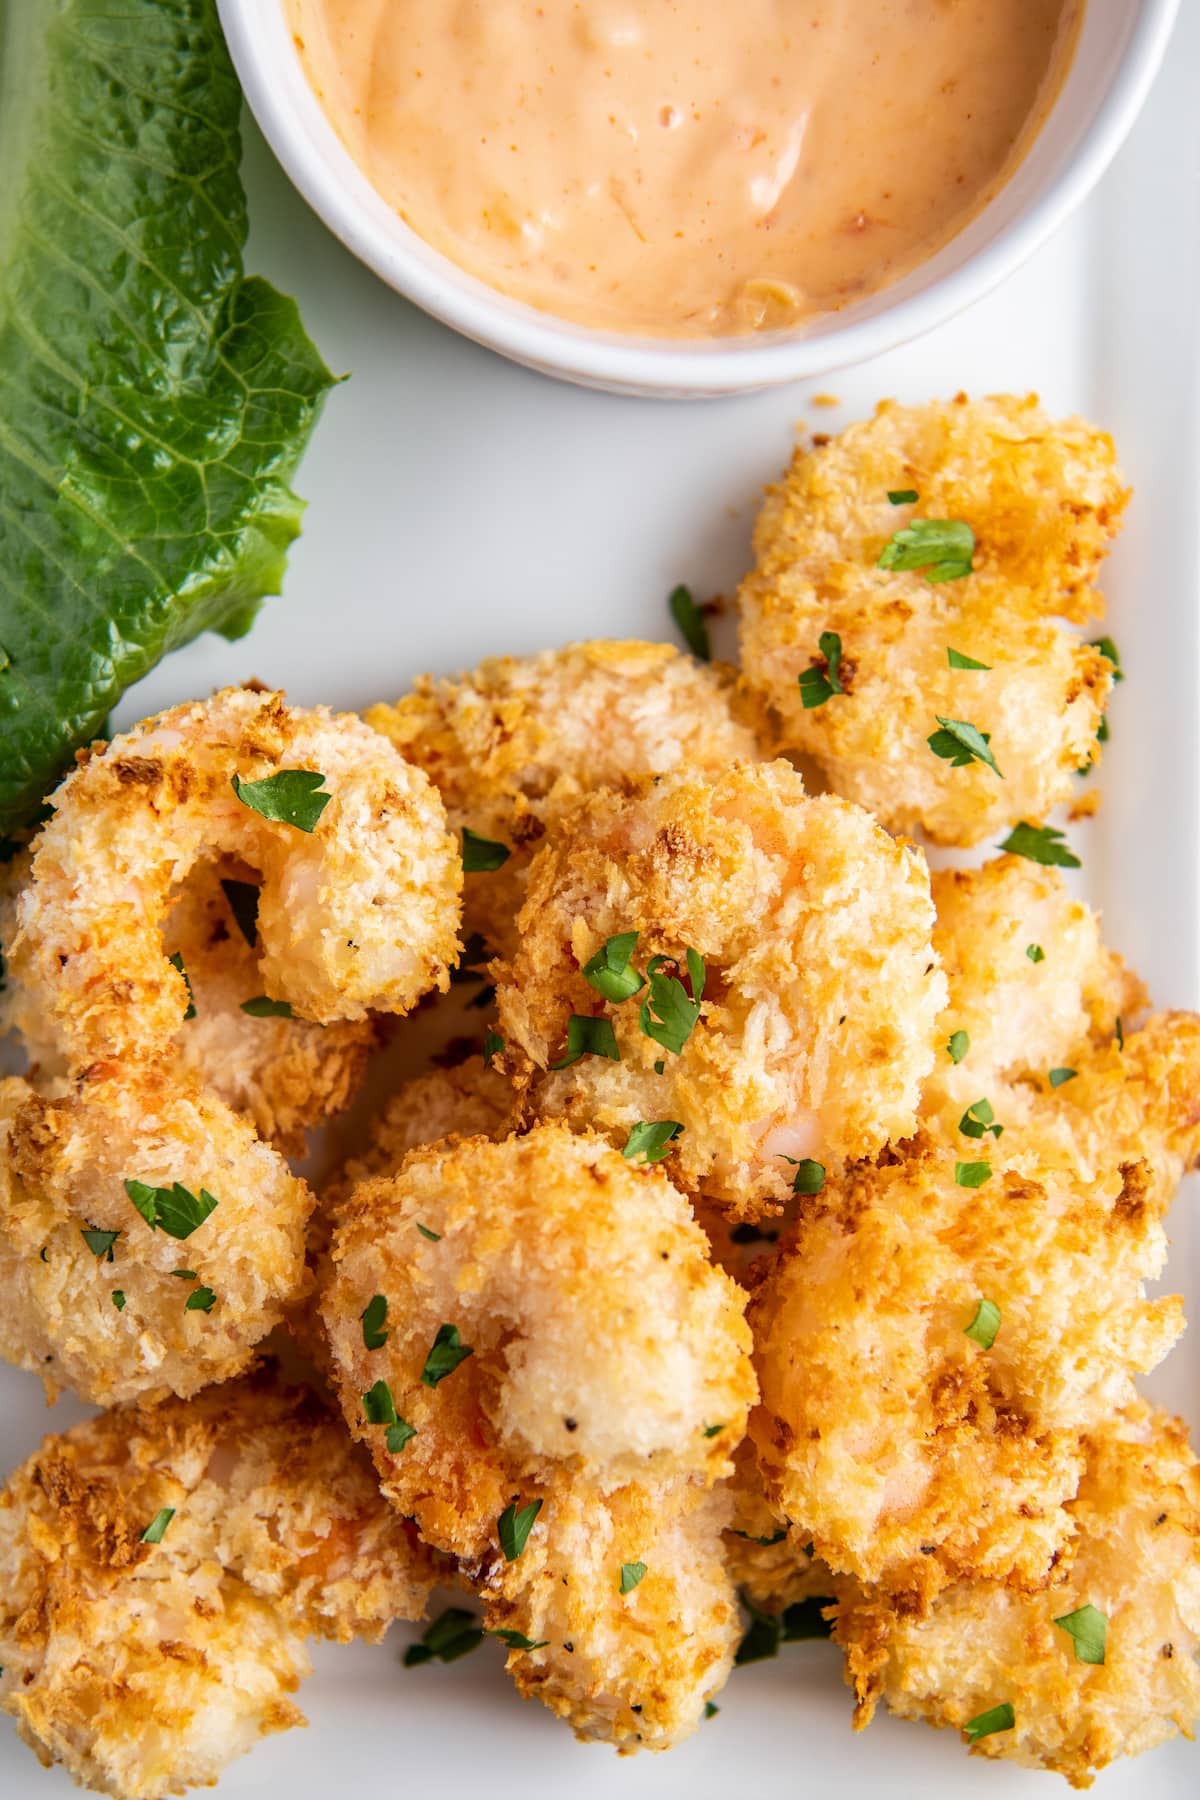 Overhead image of air fried shrimp on a white plate with a bowl of orange sauce.